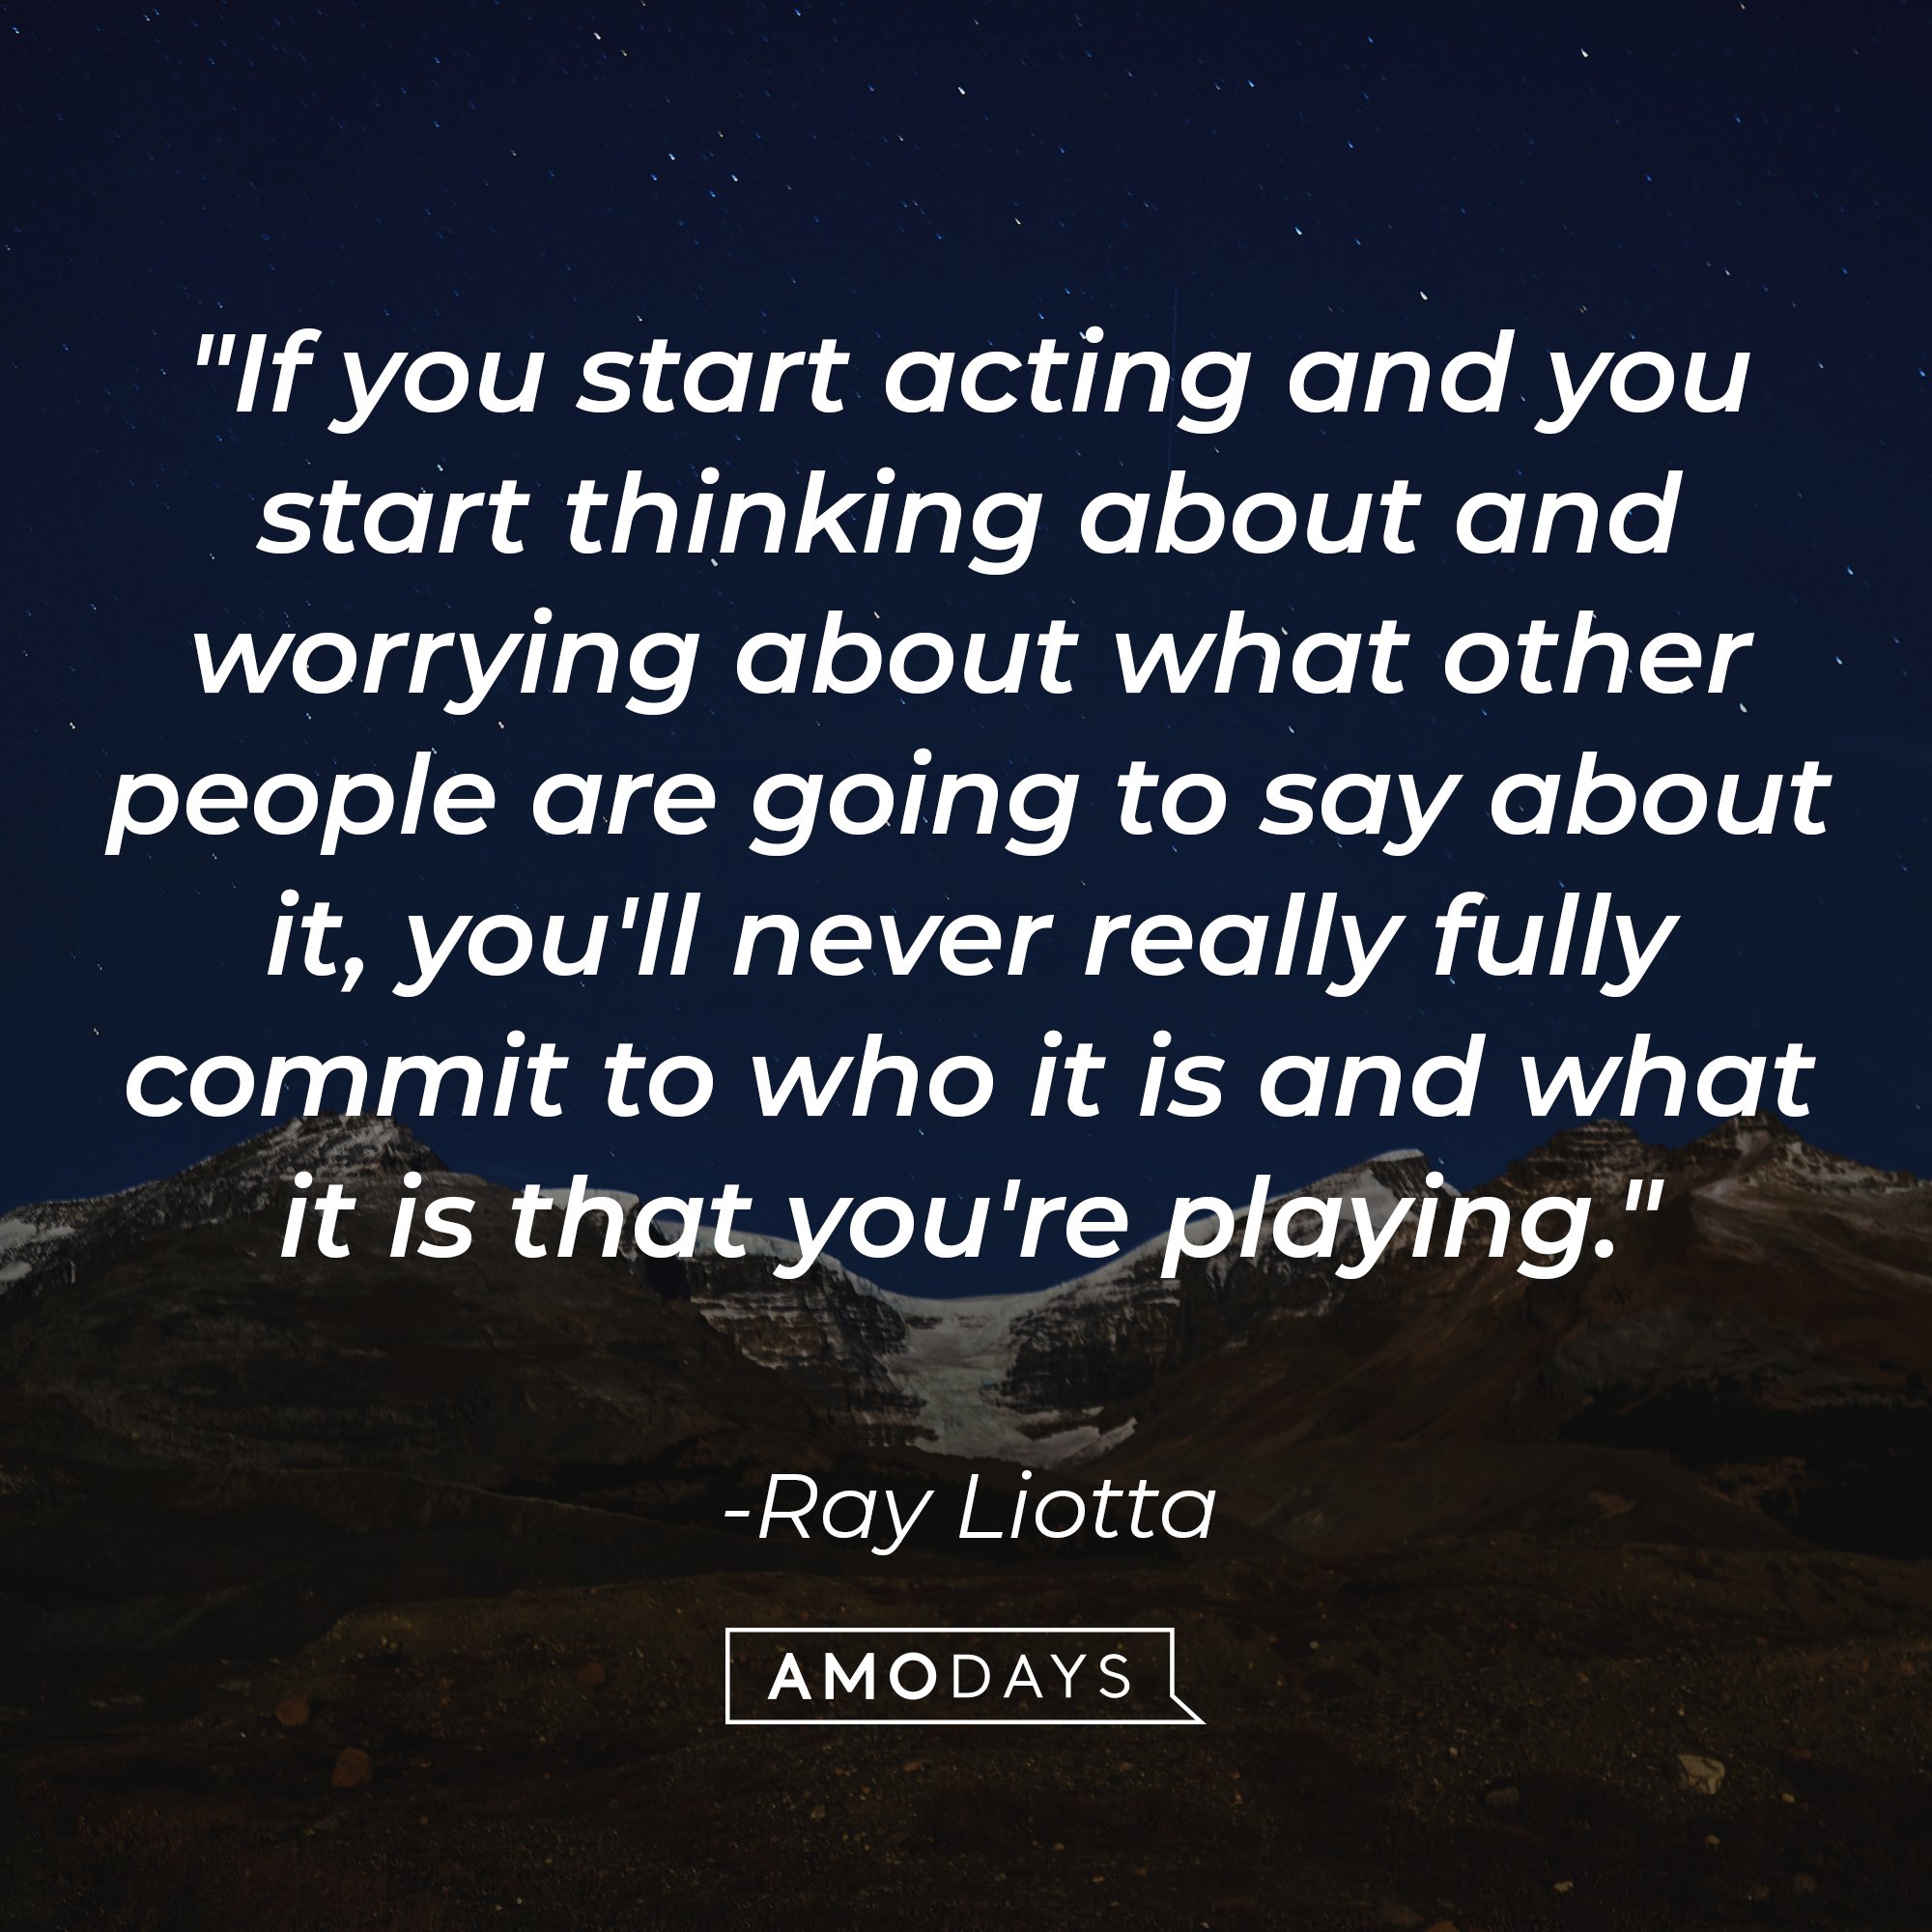 Ray Liotta’s quote: "If you start acting and you start thinking about and worrying about what other people are going to say about it, you'll never really fully commit to who it is and what it is that you're playing." | Image: AmoDays